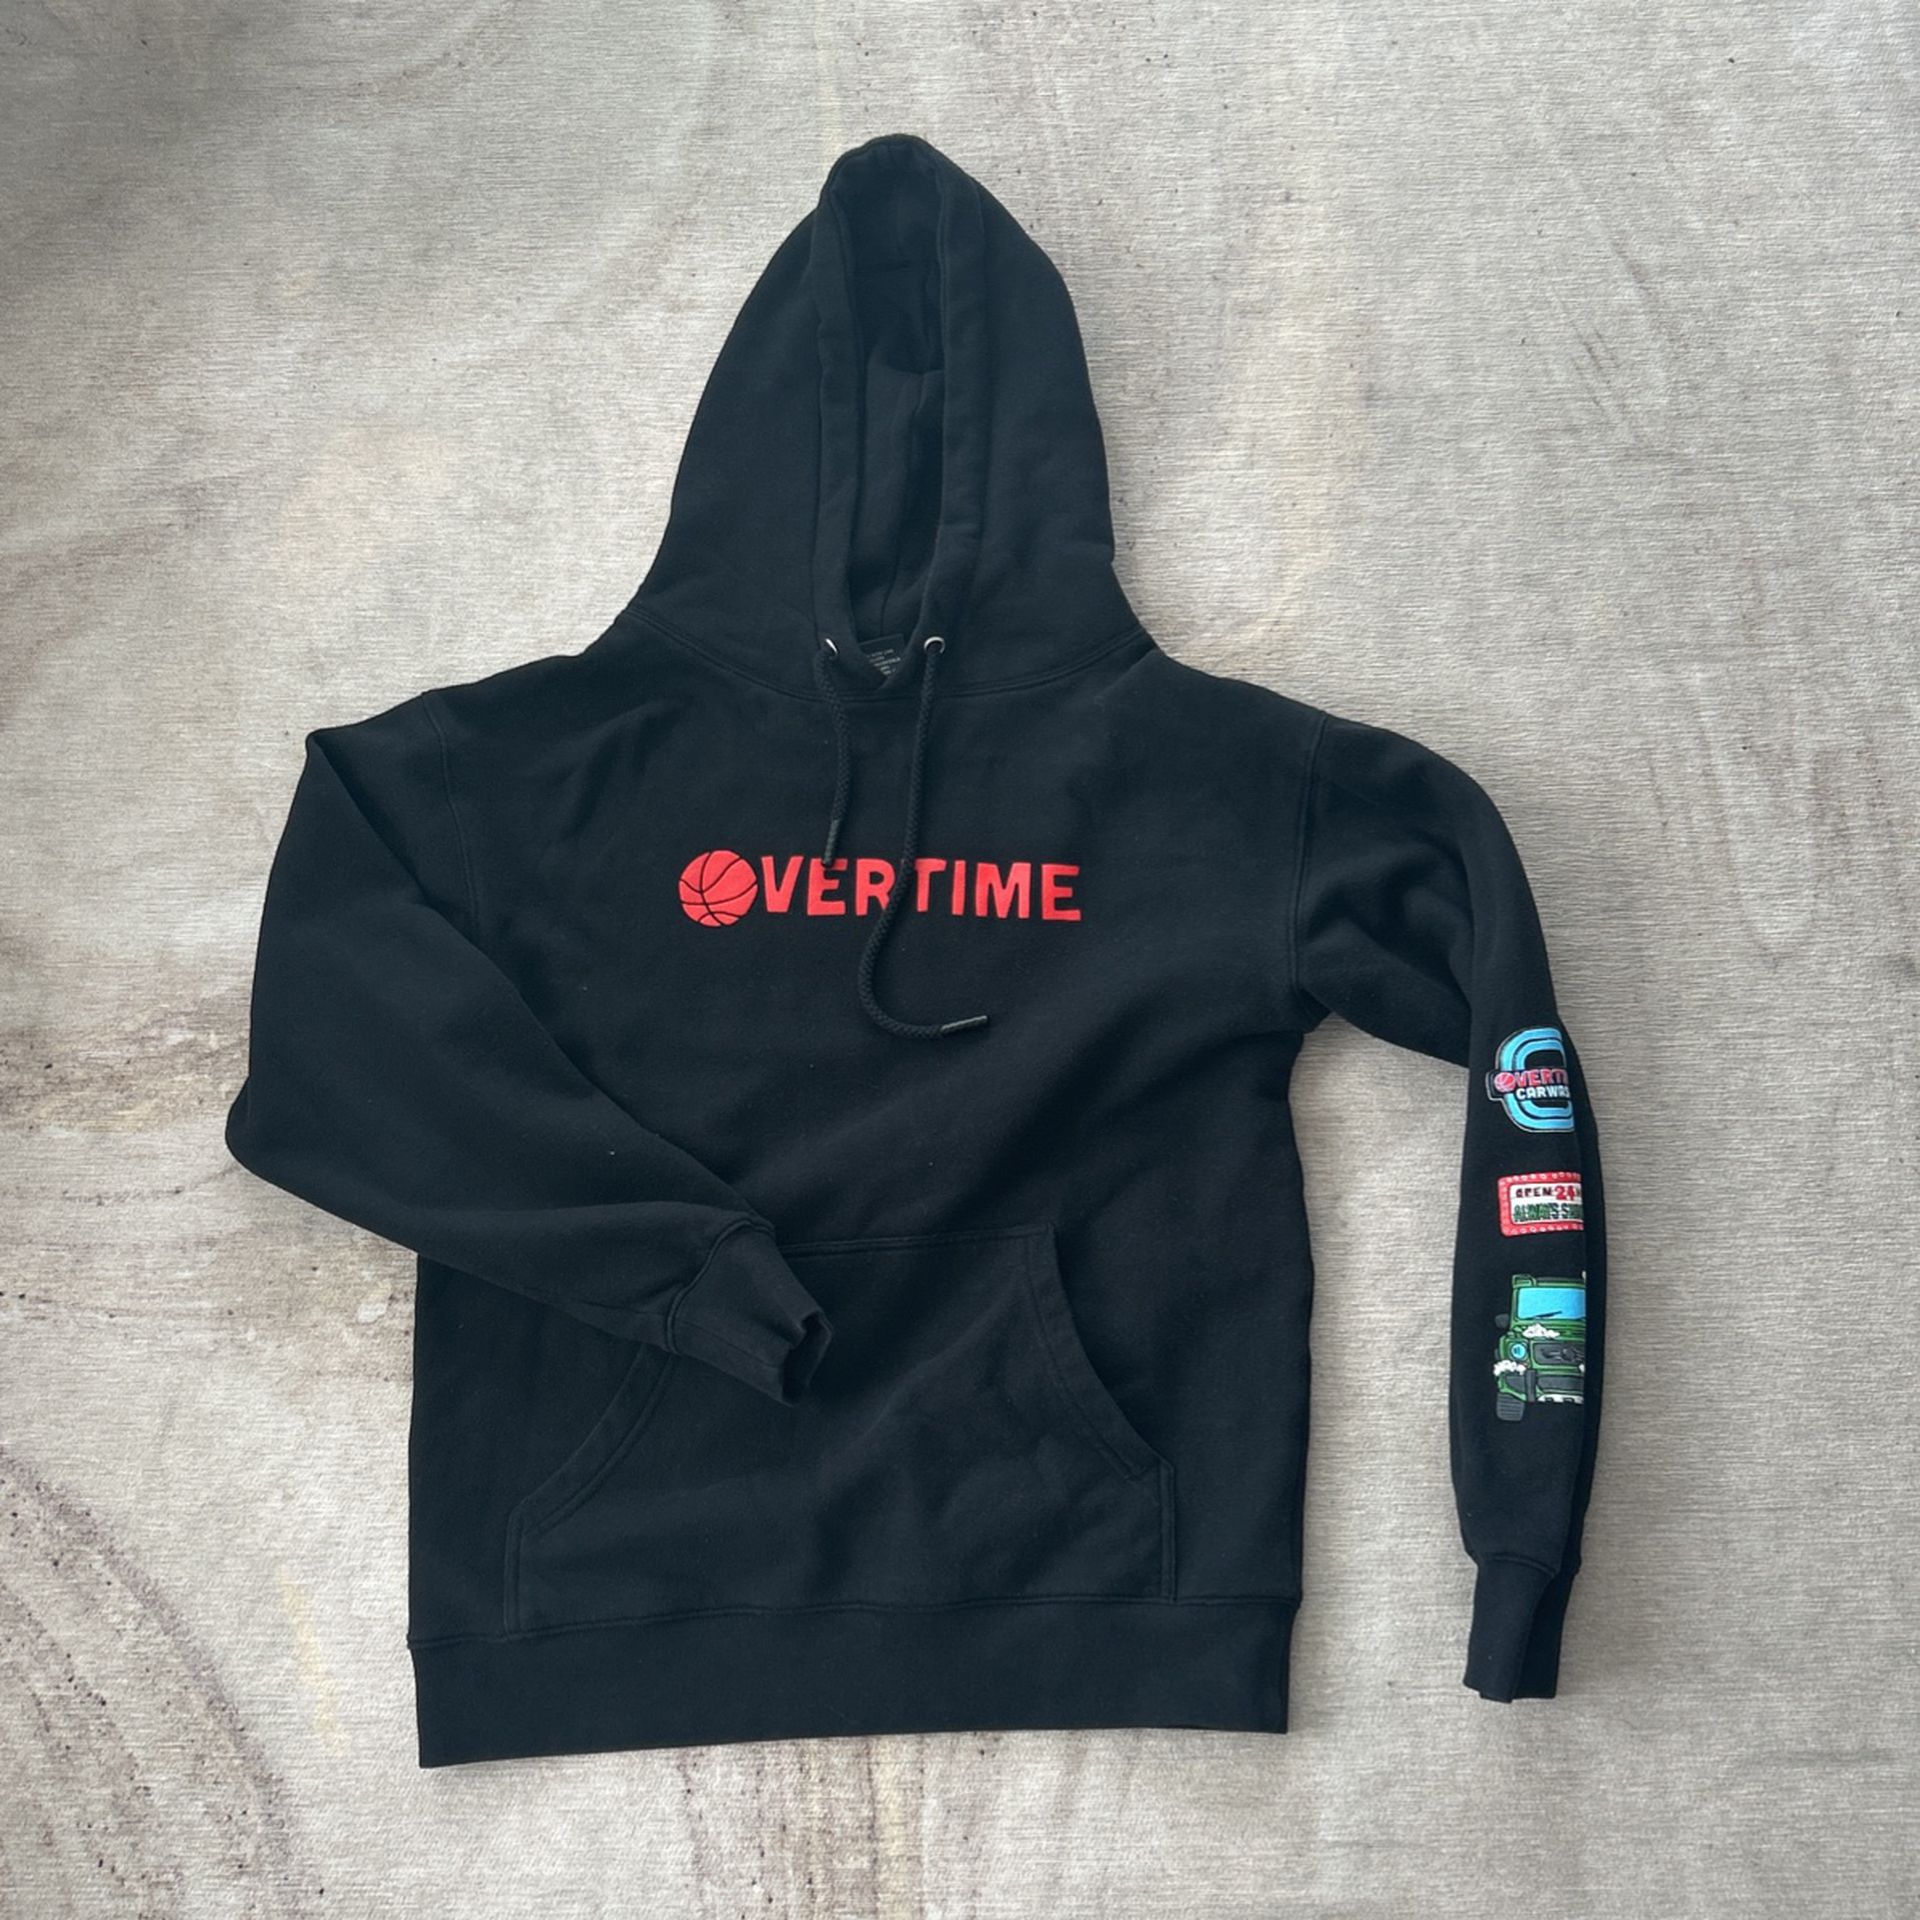 OTE Overtime Elite - Limited Addition Car wash Hoodie 🏀 